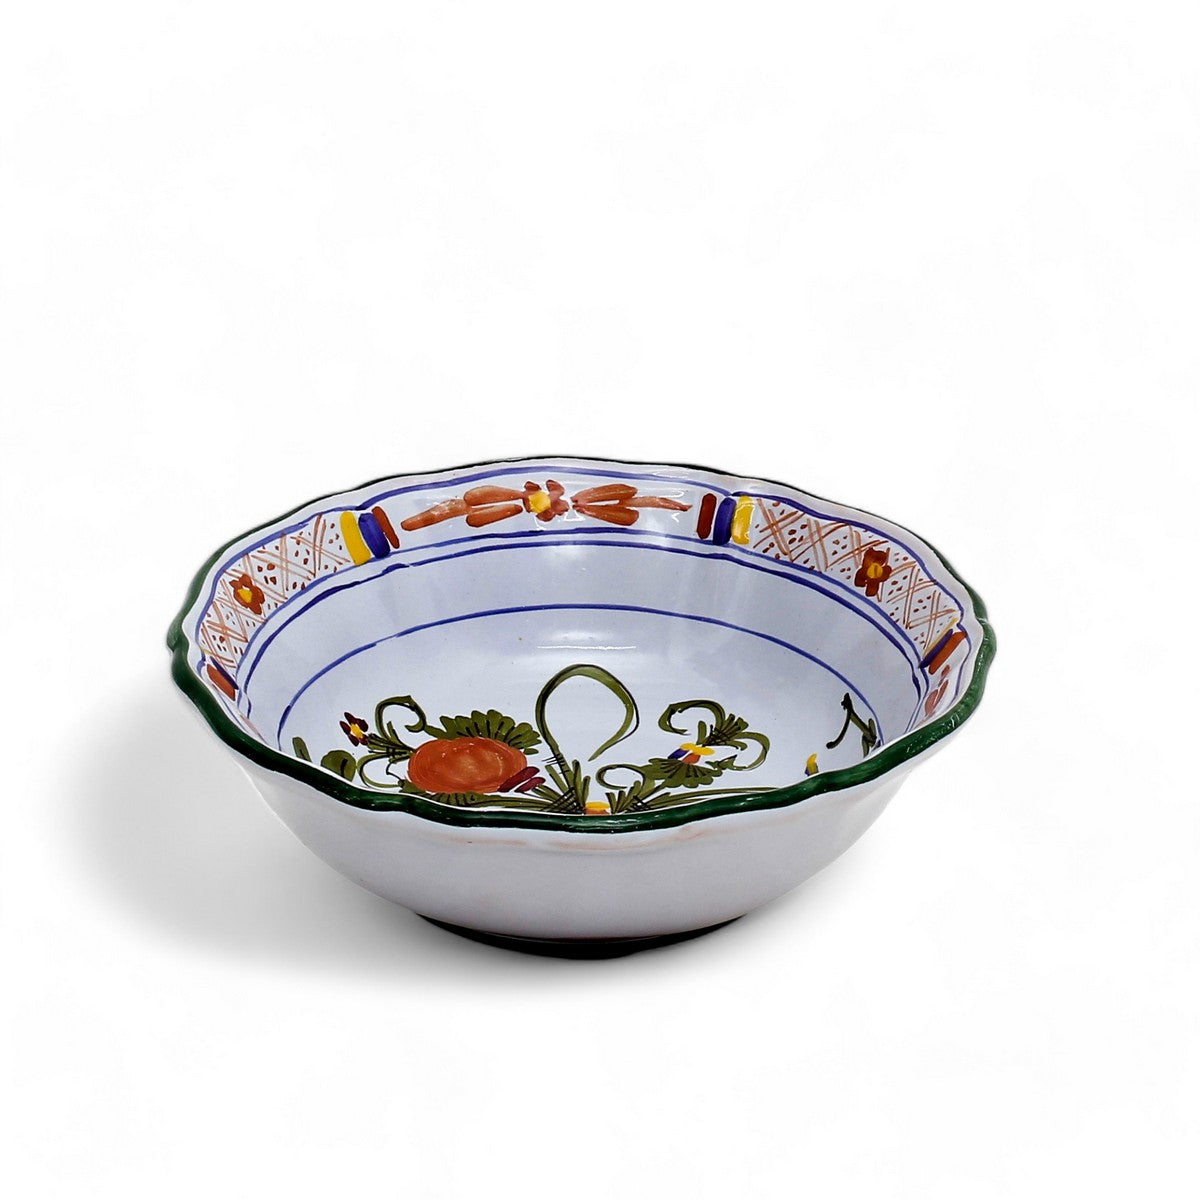 FAENZA: Cereal Bowl